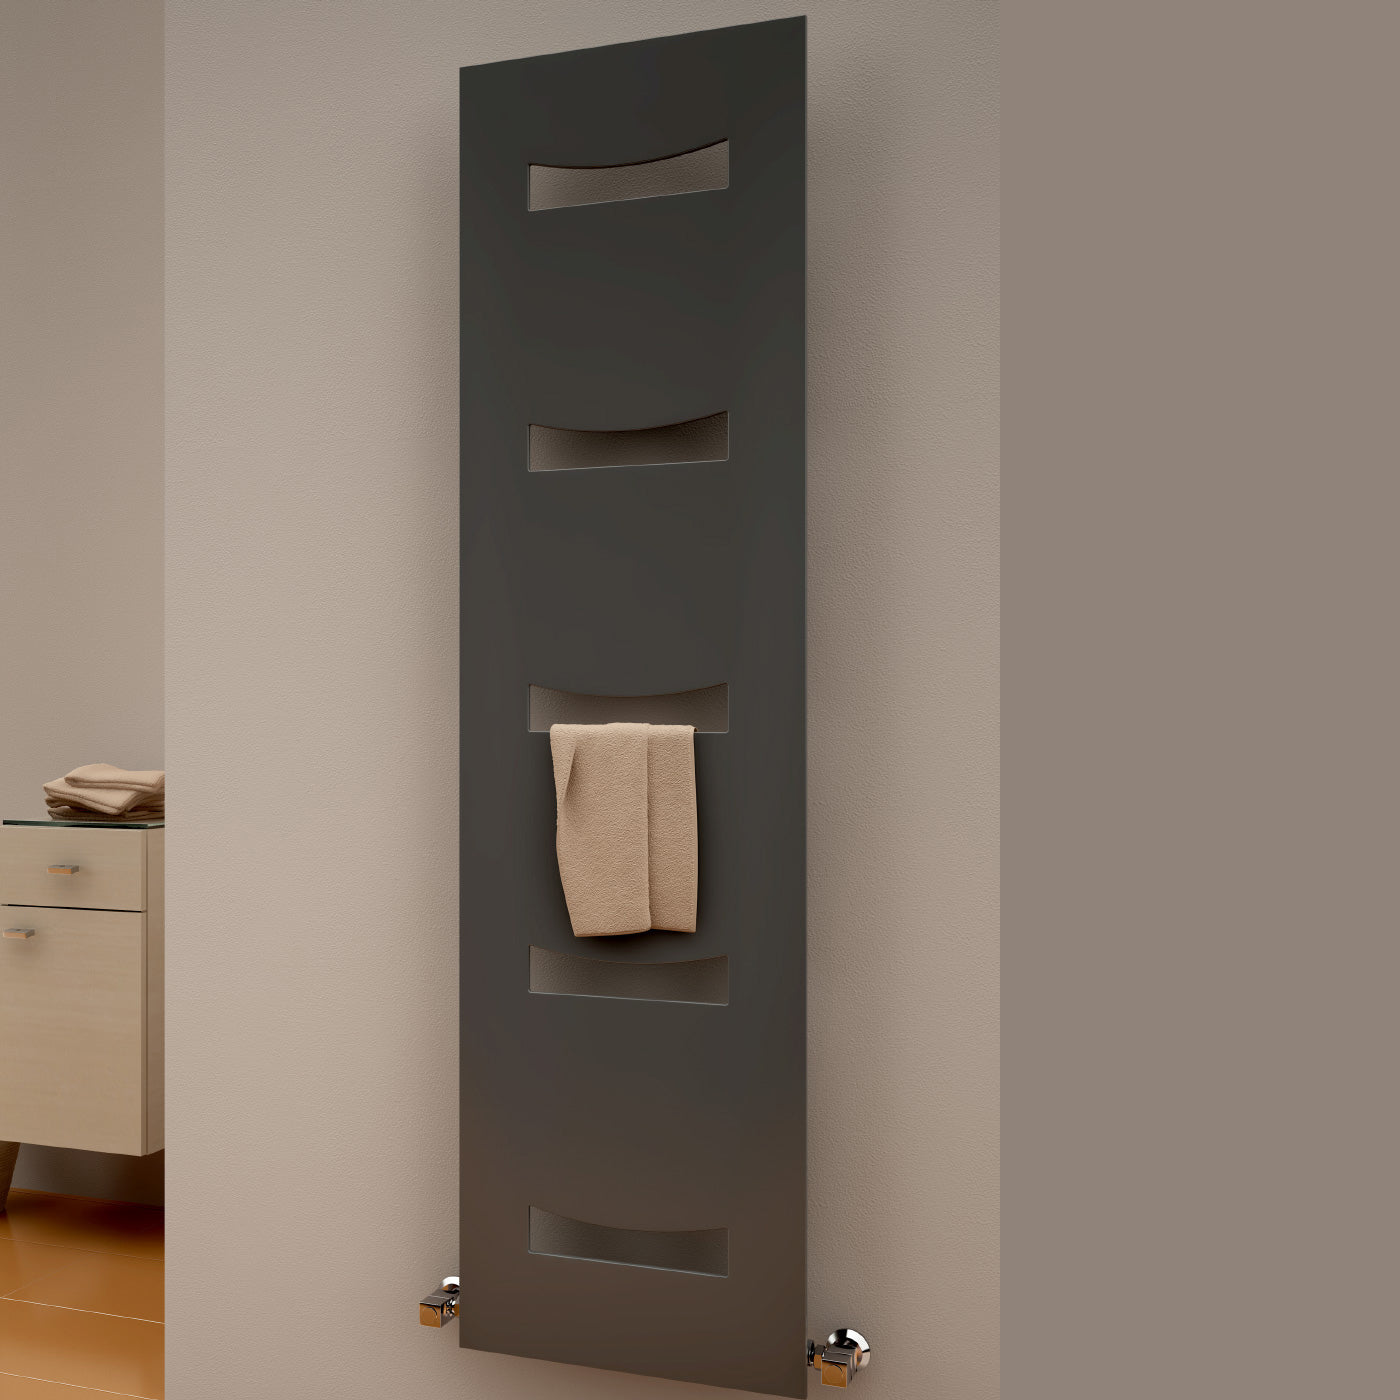 Ancora Vertical Heated Towel Radiator - 1800mm x 490mm - Anthracite